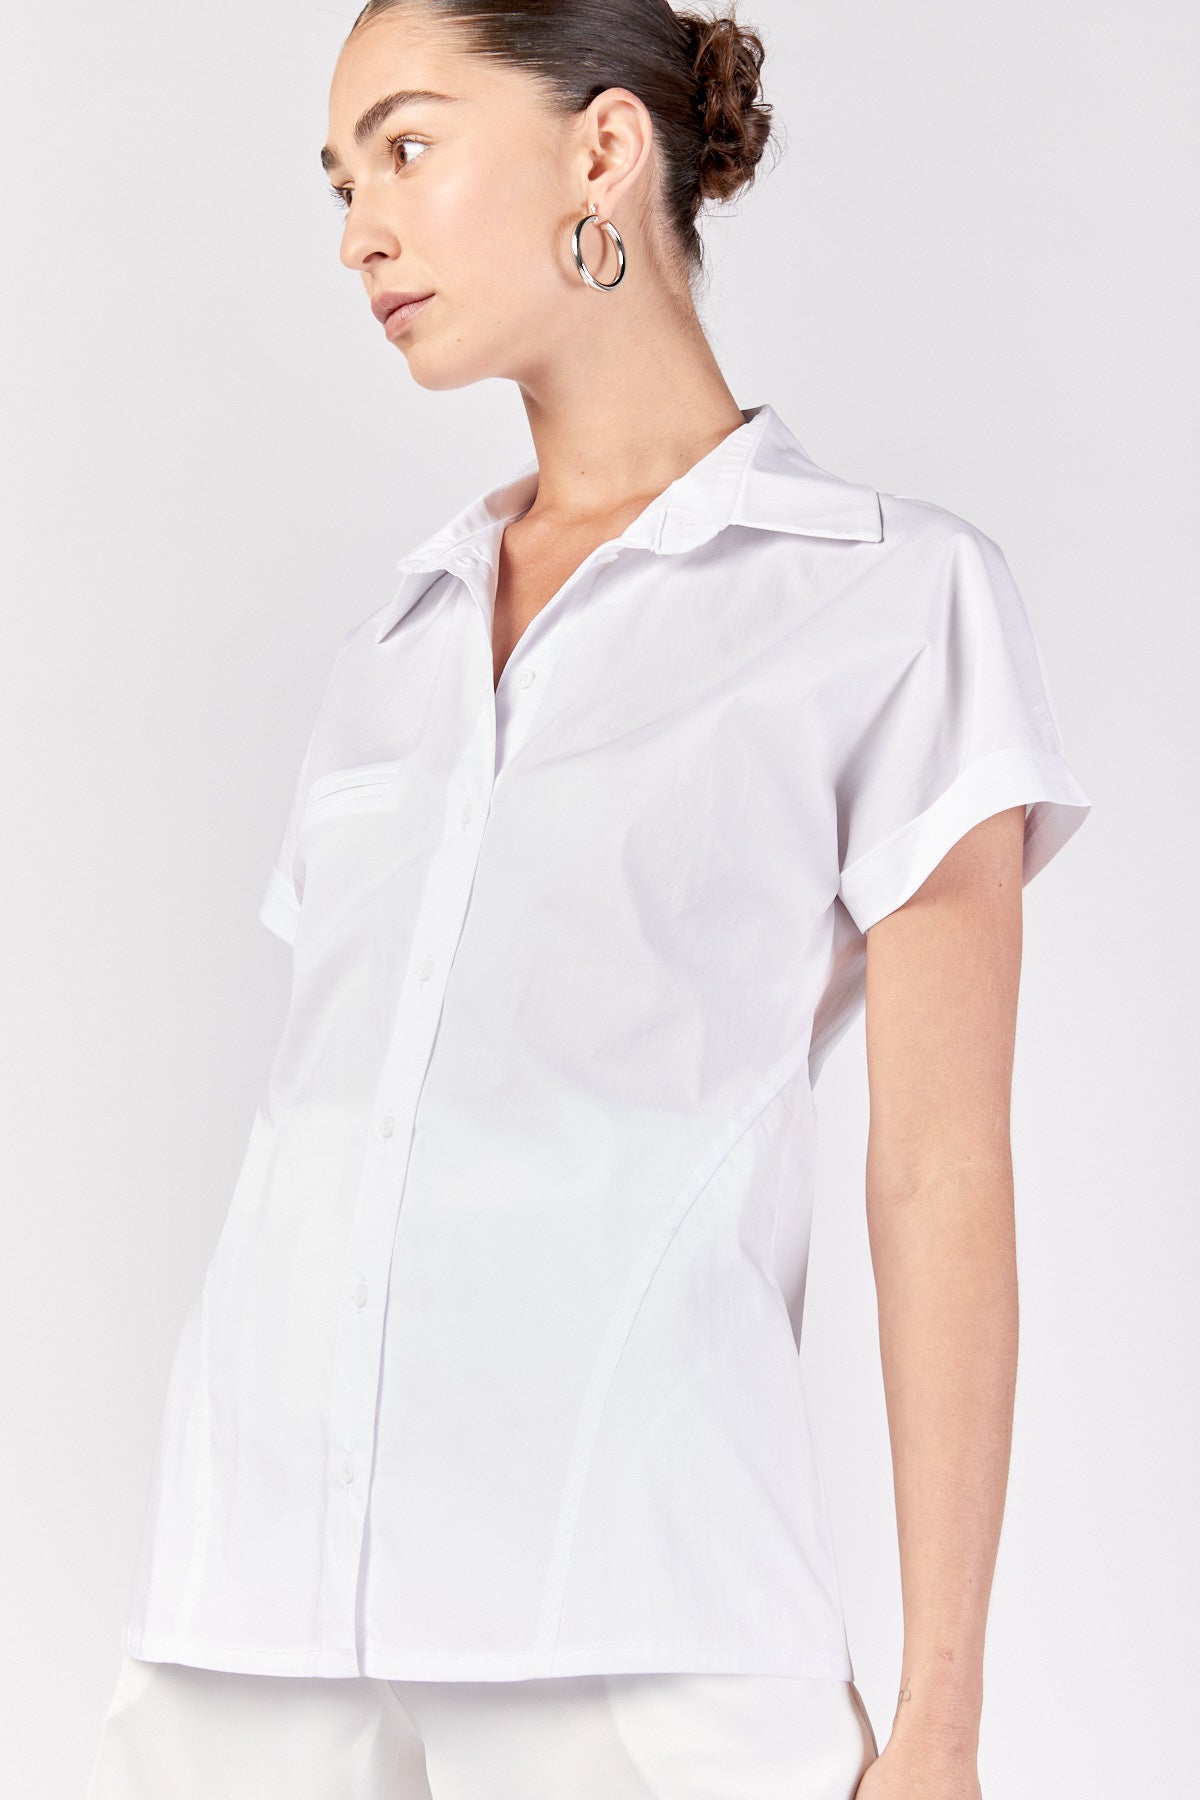 Smith Buttoned Shirt - White